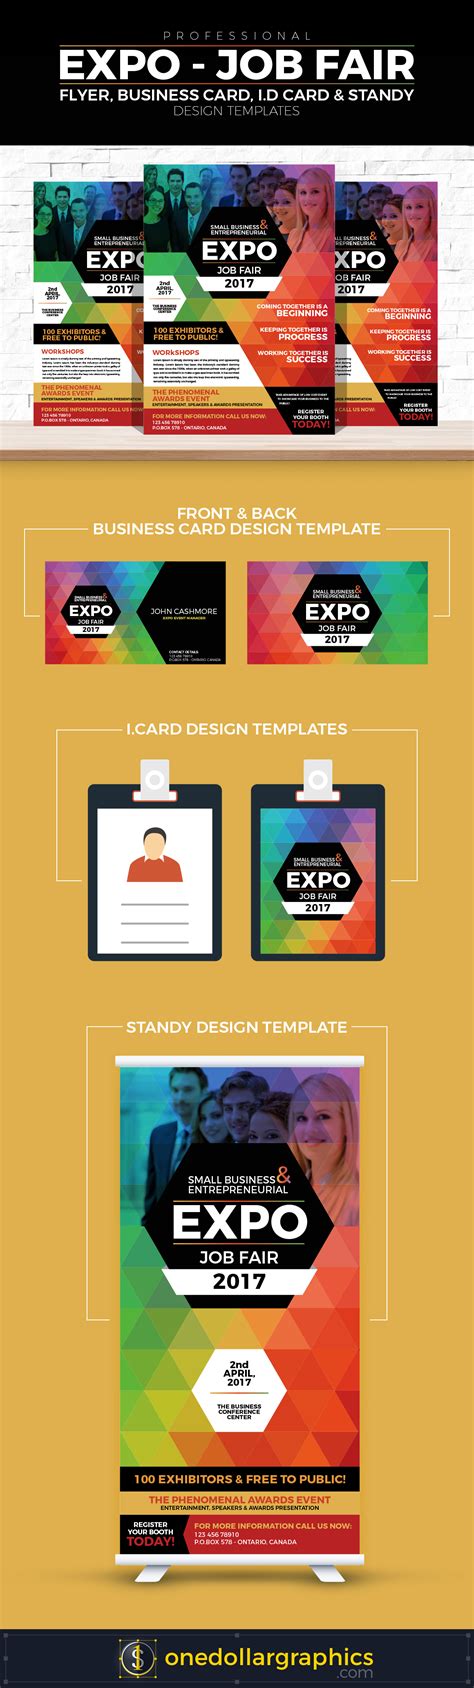 Use a word business card template to design your own custom cards by adding a logo or tagline. Professional Expo-Job Fair Flyer, Business Card, I.D Card ...